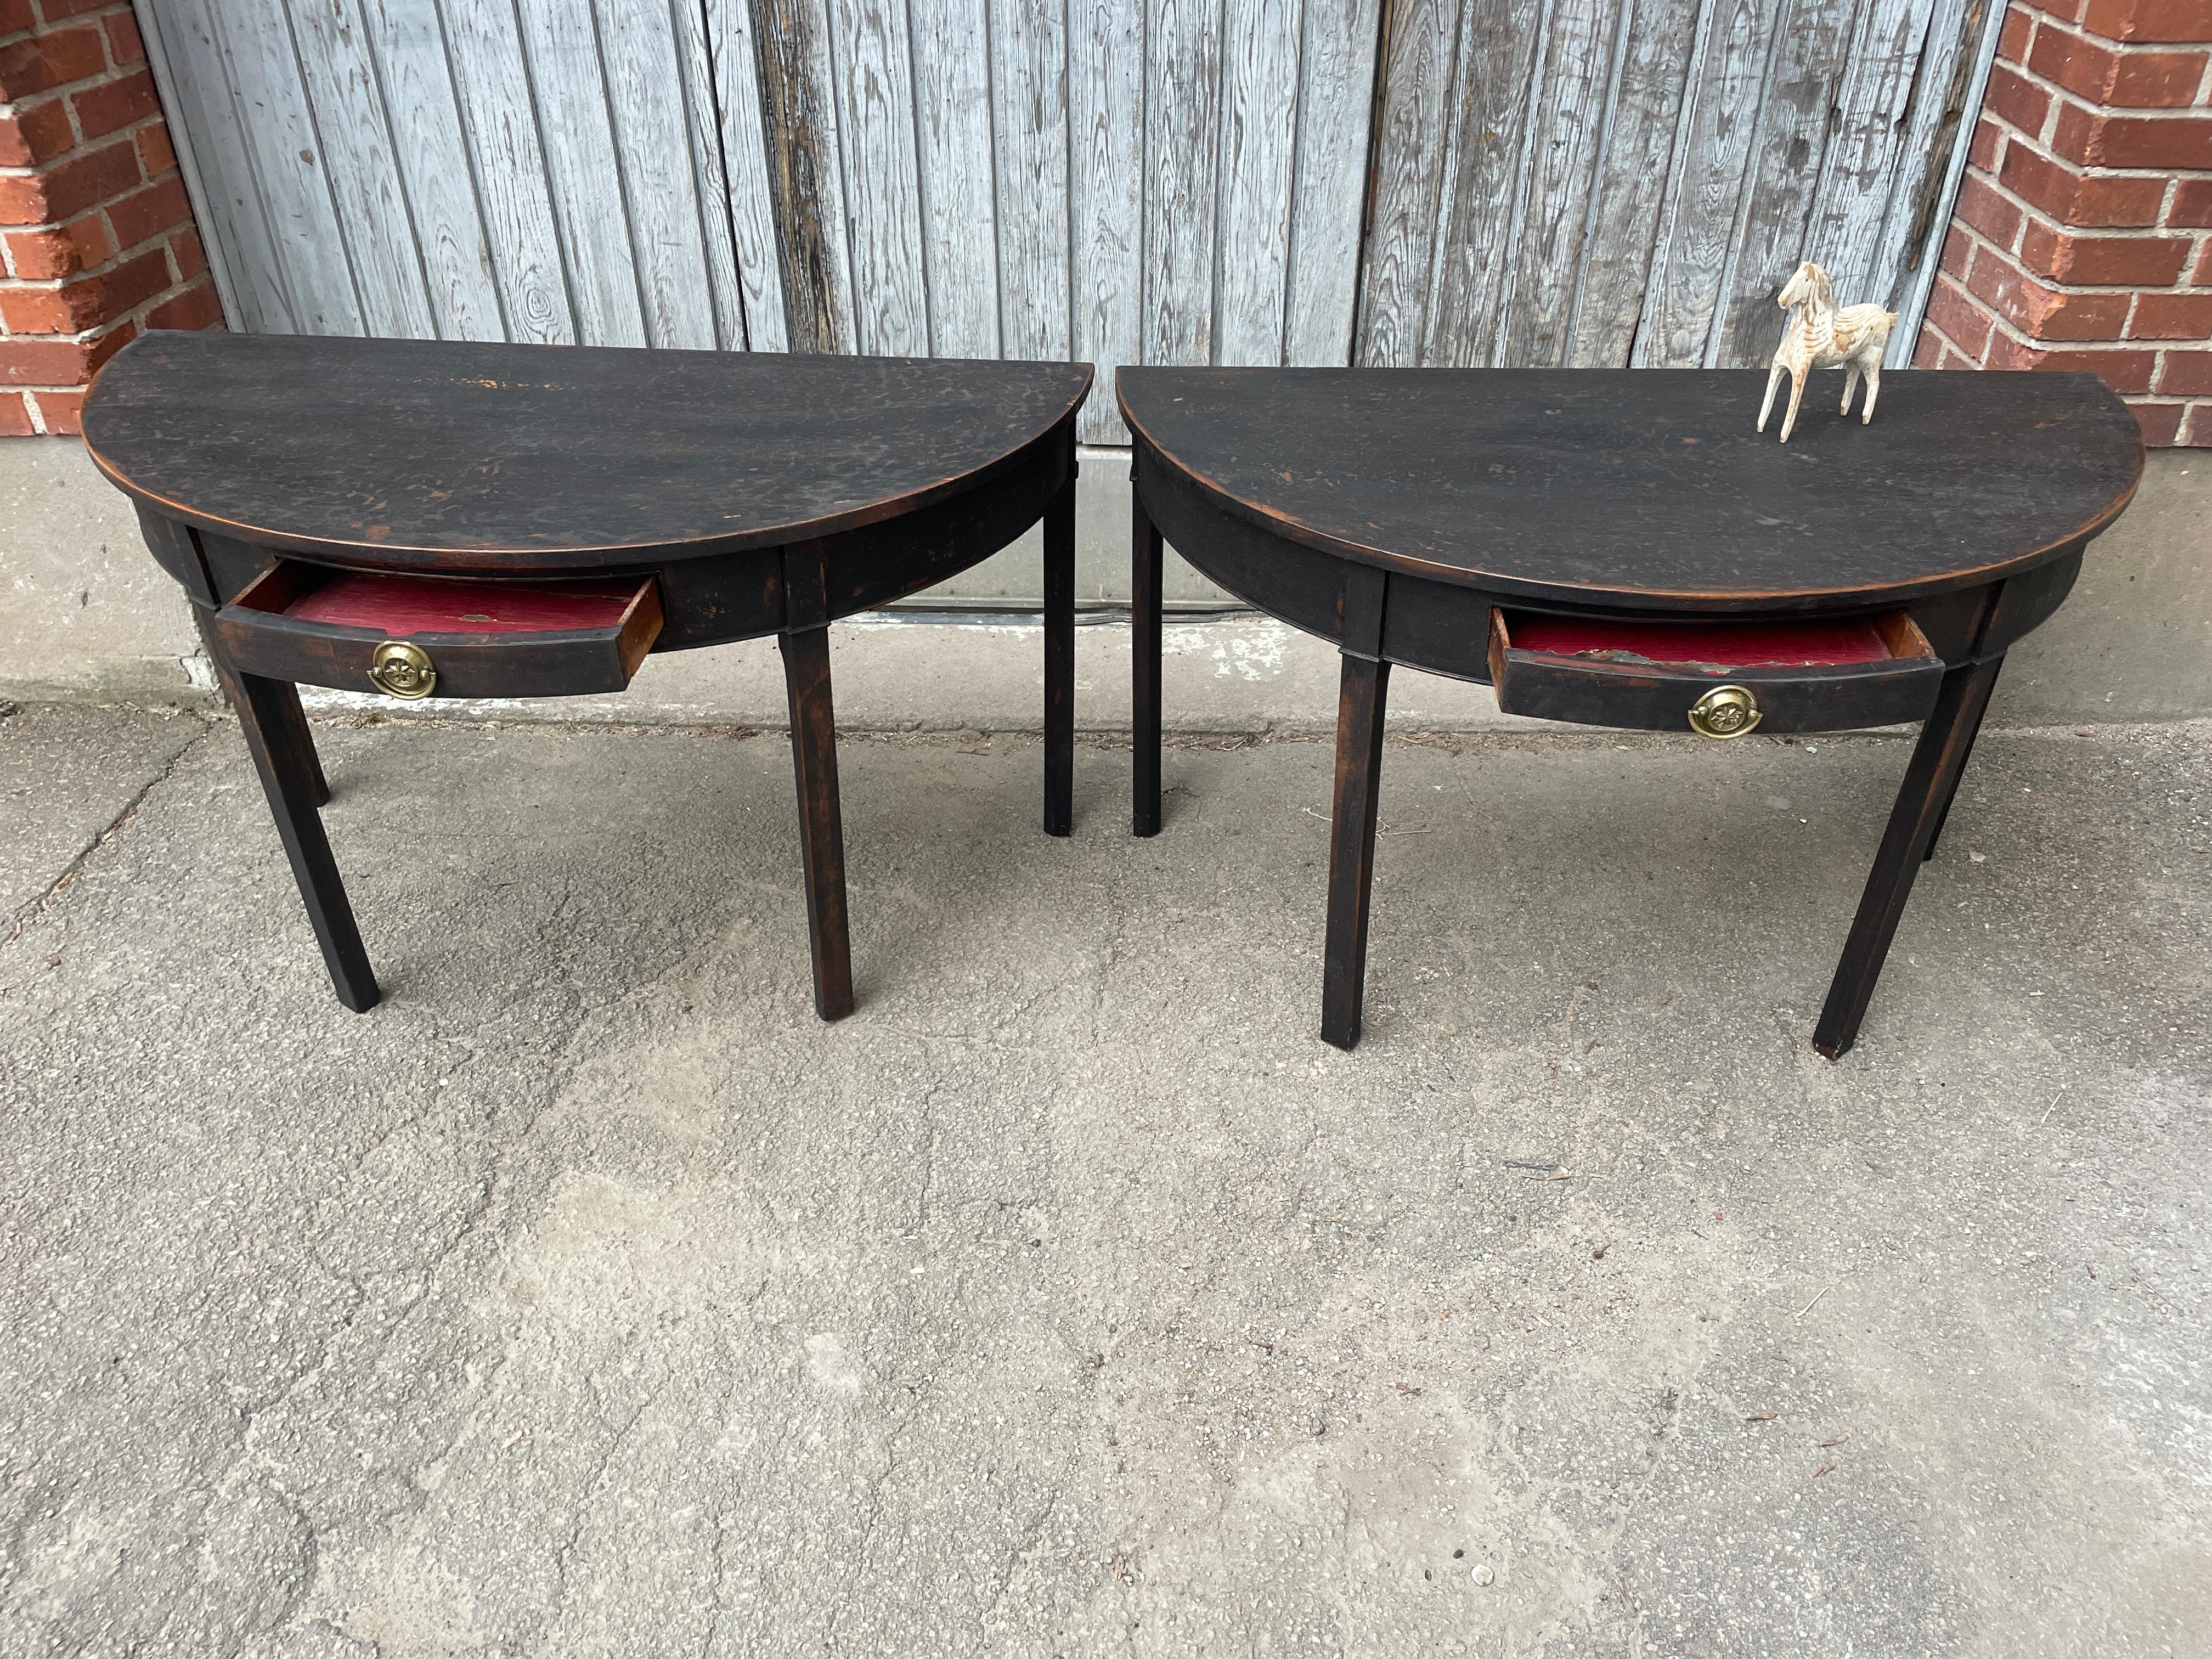 Pair of Black Painted Gustavian Demilune Table Consoles In Good Condition For Sale In Haddonfield, NJ